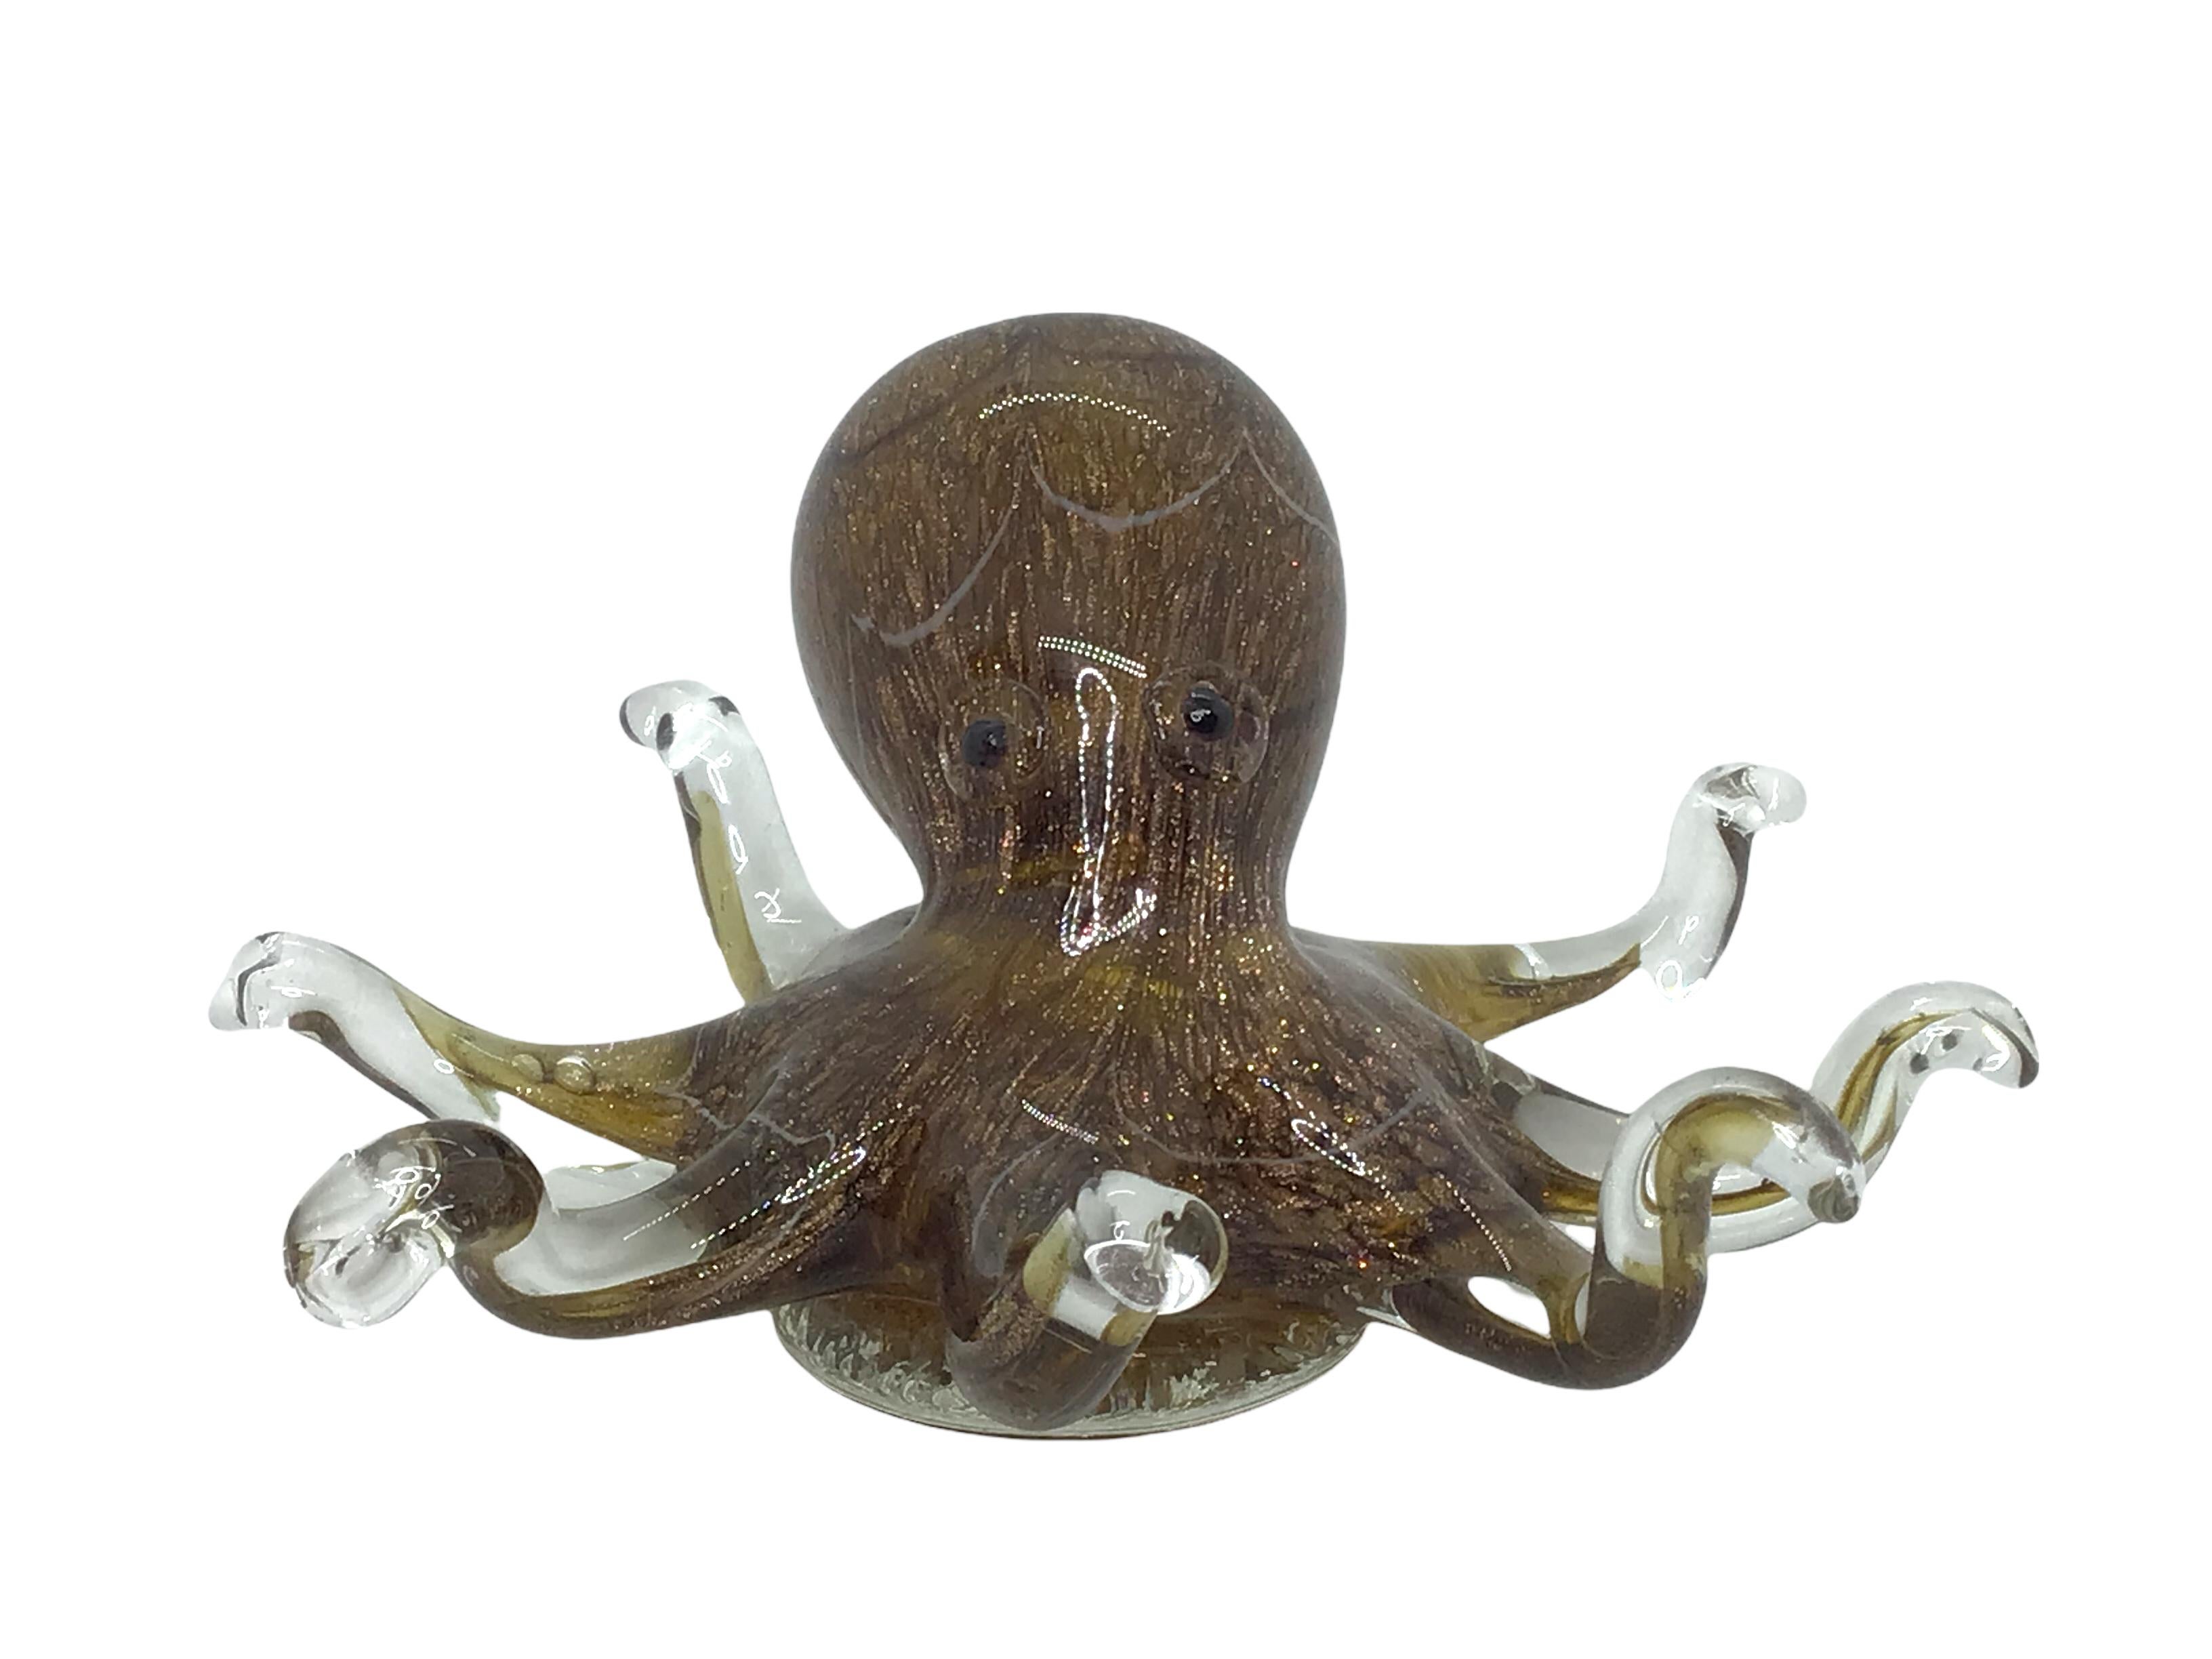 Beautiful Murano hand blown Italian art glass paper weight or sculpture. Showing a giant octopus. Colors are a brown, grey, white, black and clear, with golden glitter. A beautiful nice addition to your desktop or as a decorative piece in every room.